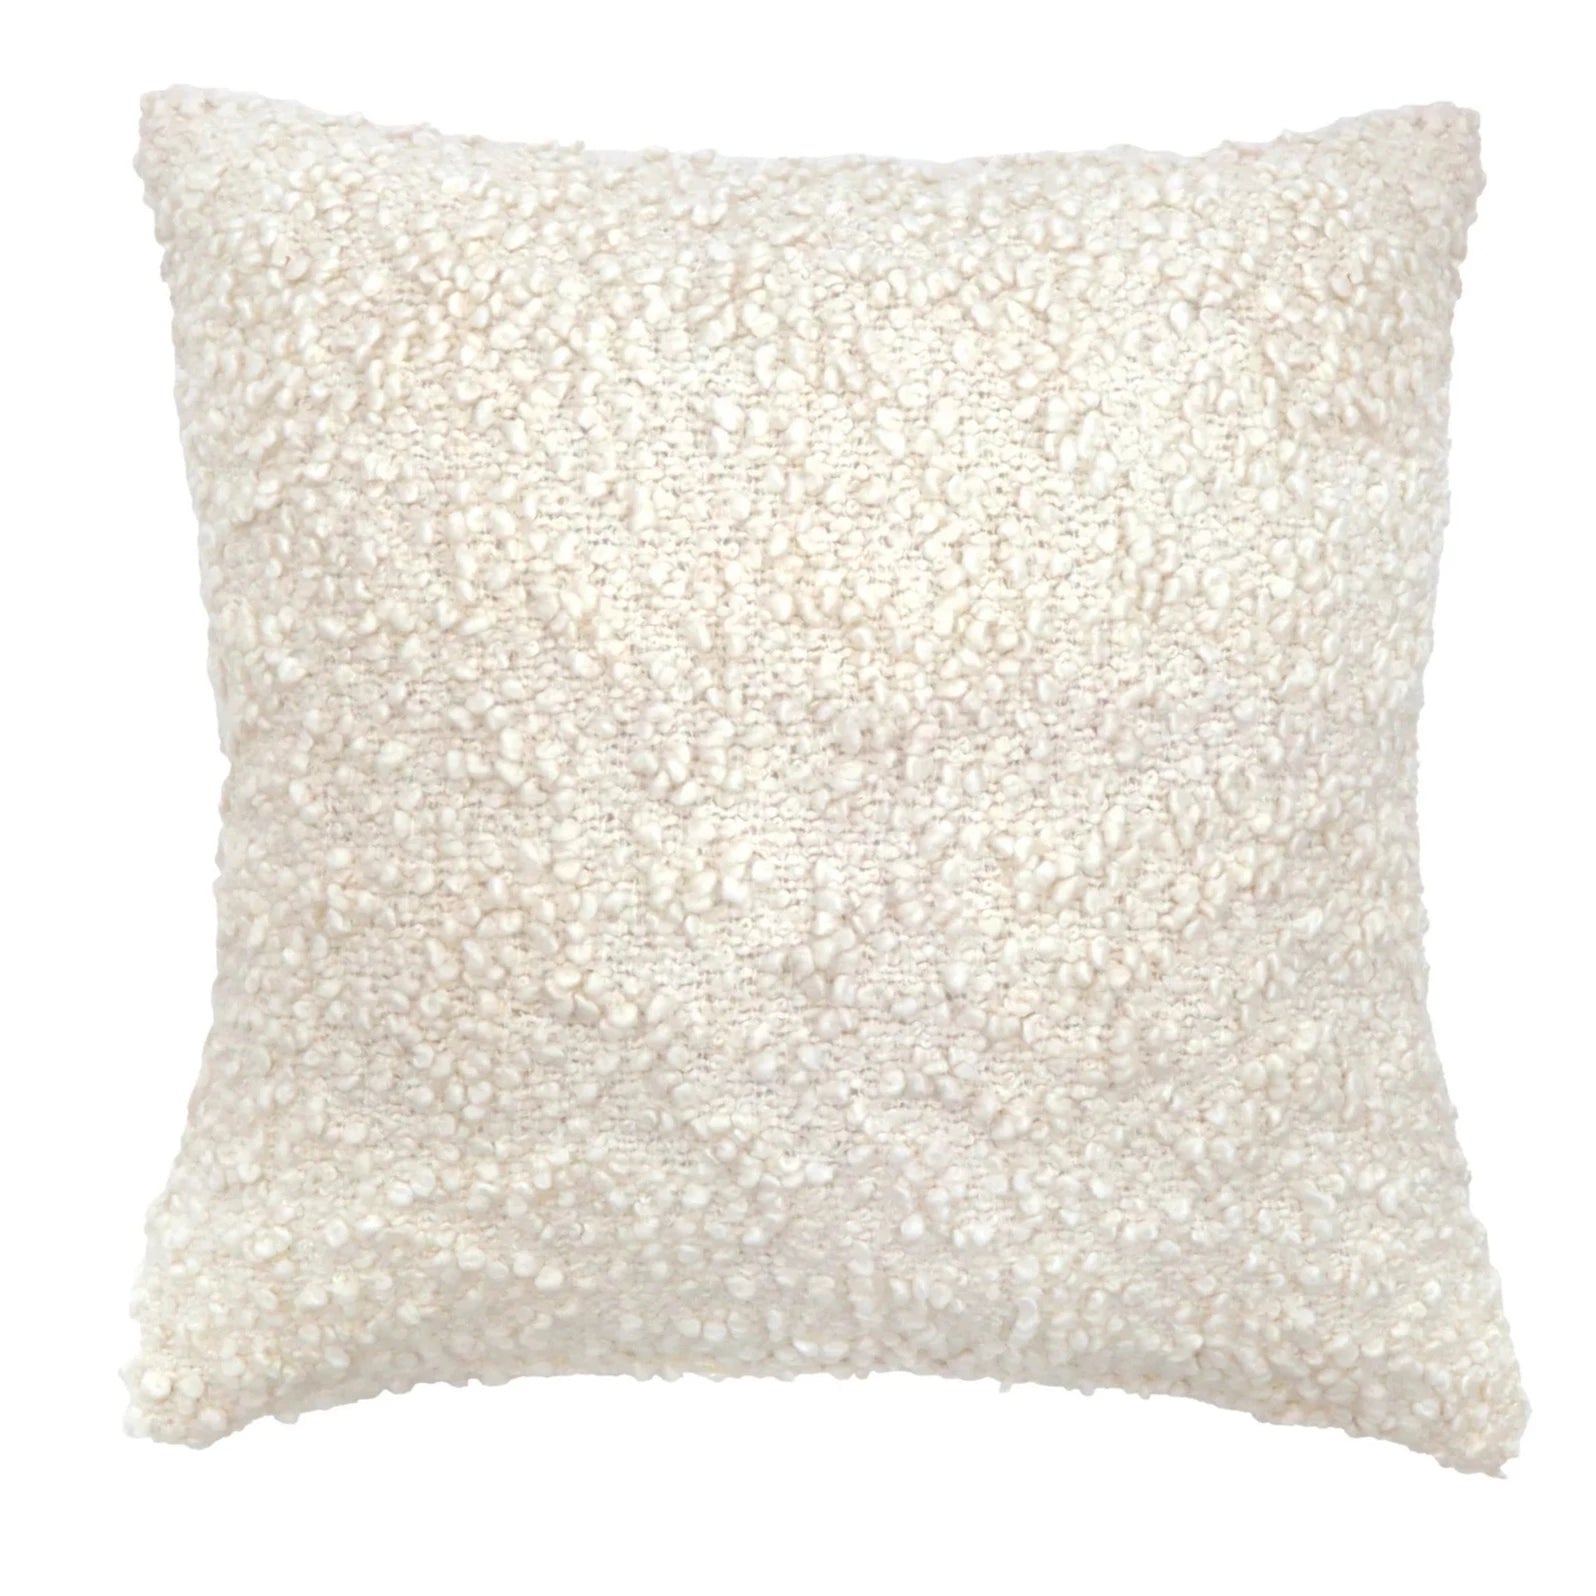 Murphy Ivory Pillow by Pom Pom at Home